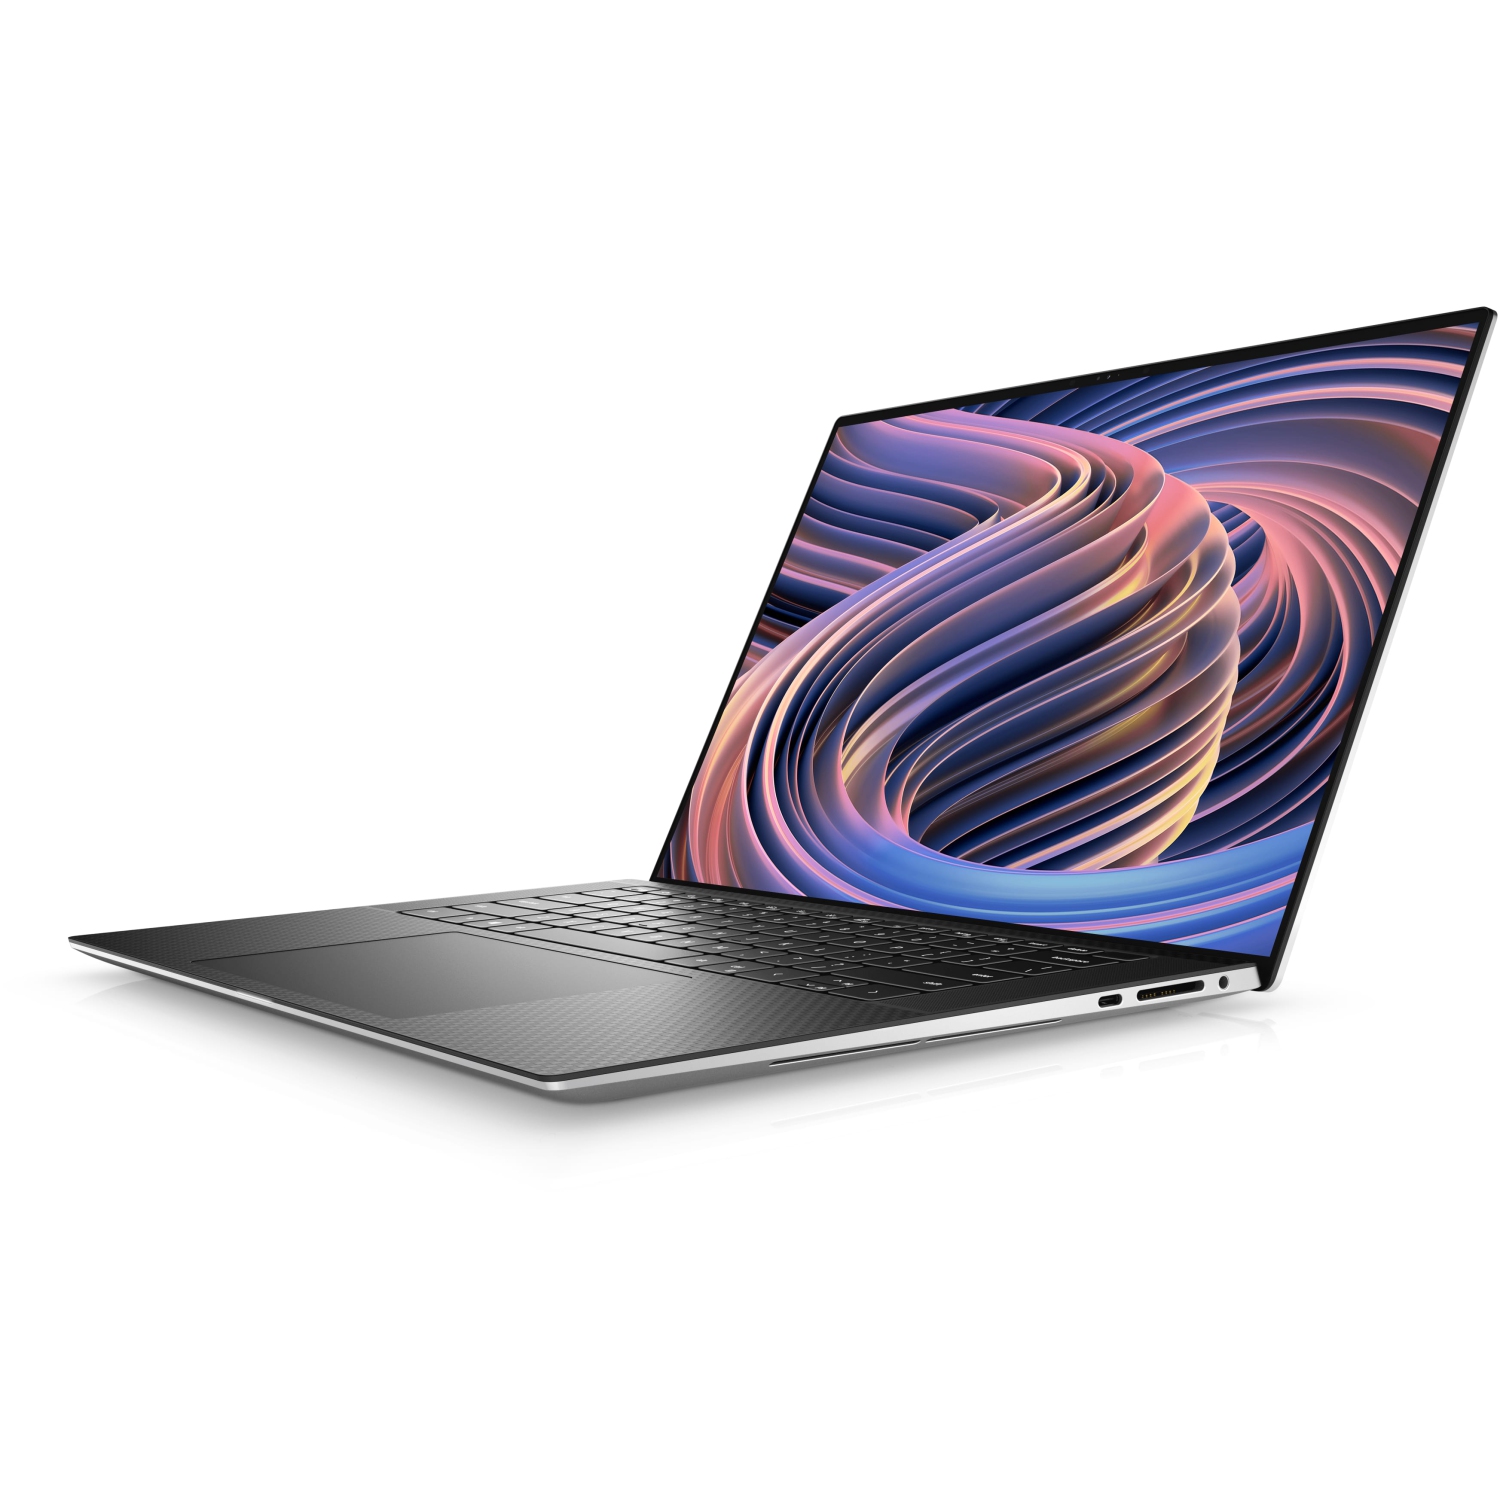 Refurbished (Excellent) – Dell XPS 9520 Laptop (2022) | 15.6" 4K Touch | Core i7 - 1TB SSD - 32GB RAM - RTX 3050 | 14 Cores @ 4.7 GHz - 12th Gen CPU